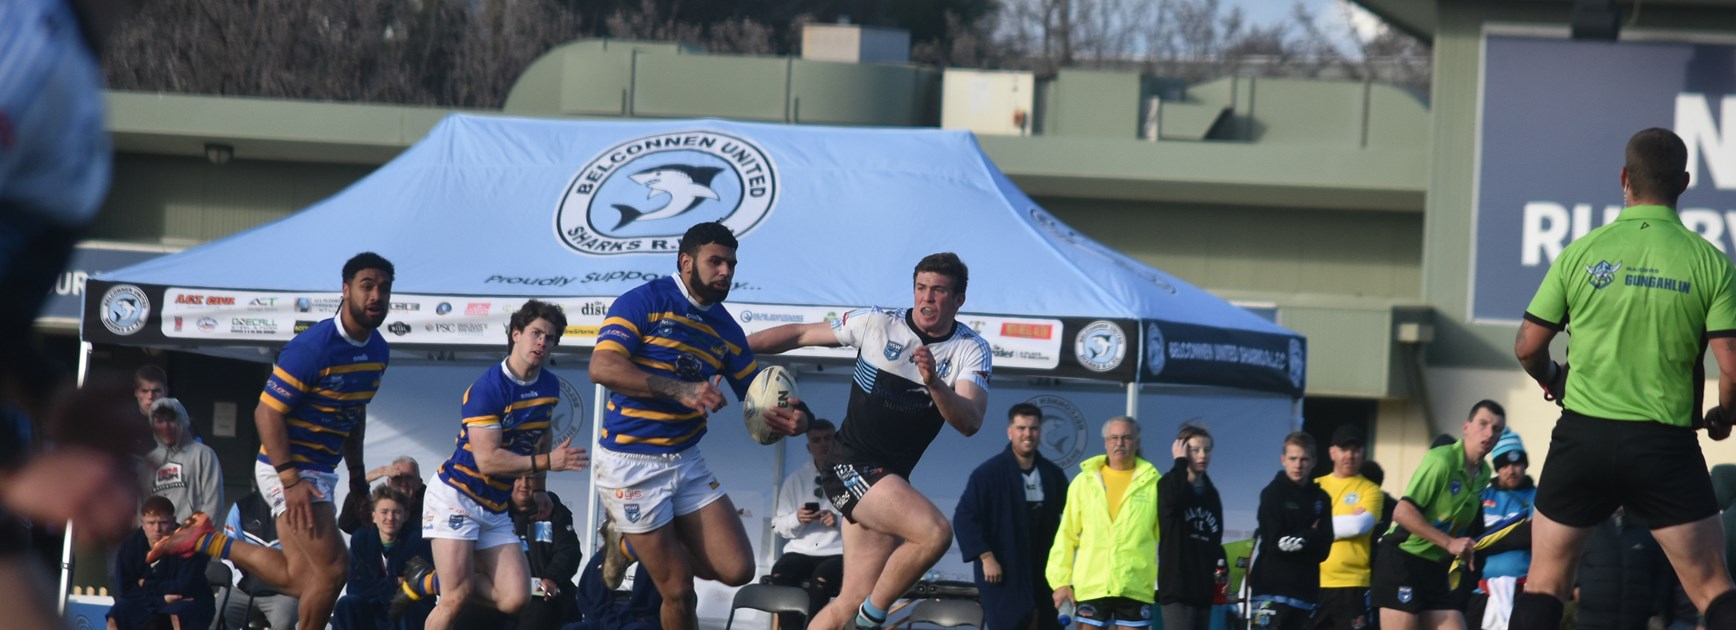 Woden fight off Sharks comeback for an important win on the road